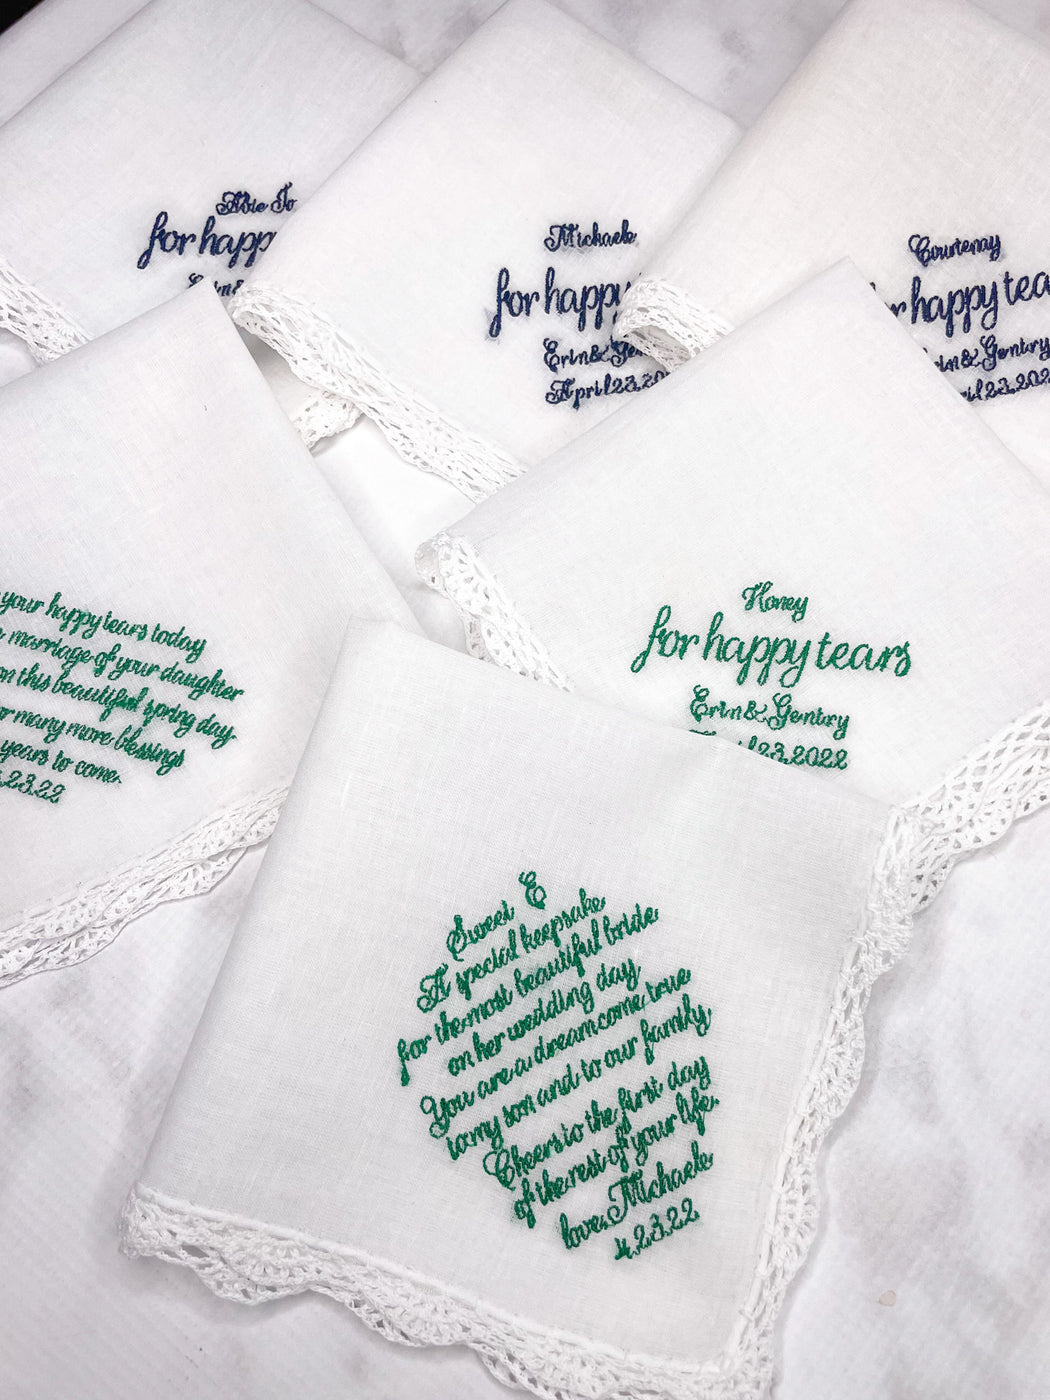 Free Form handkerchief to celebrate the special event